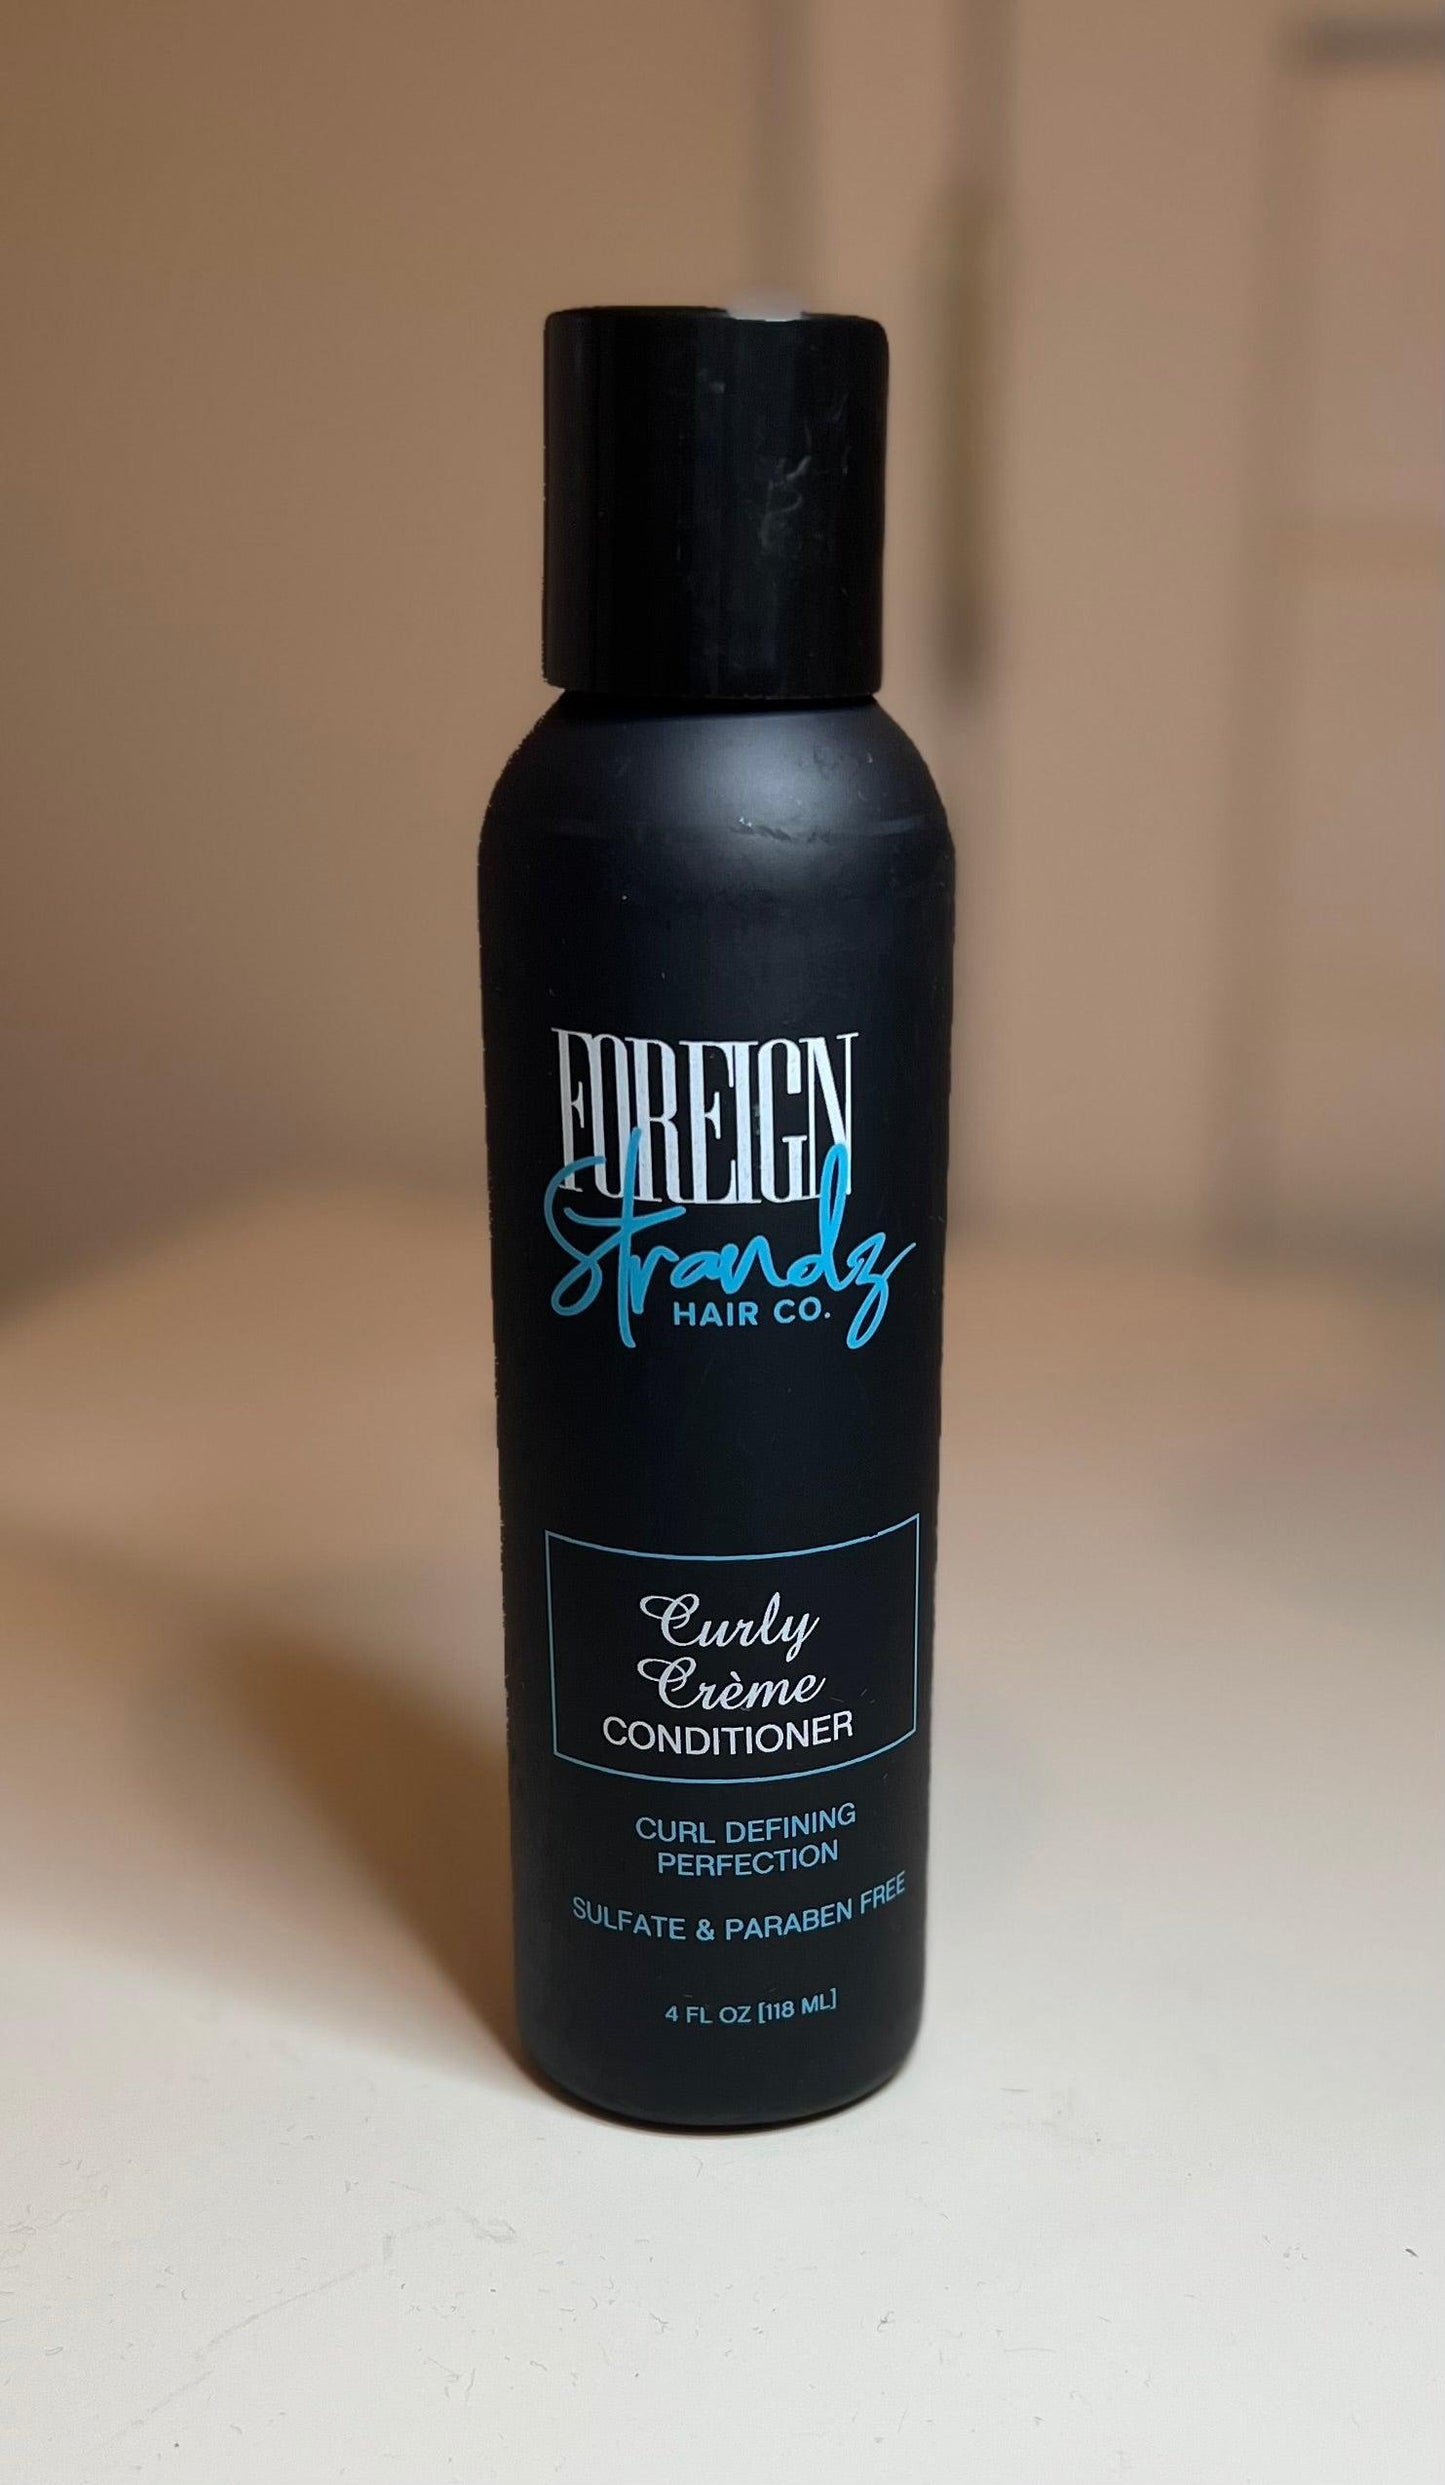 Curly Creme Conditioner - Foreign Strandz Hair Co.